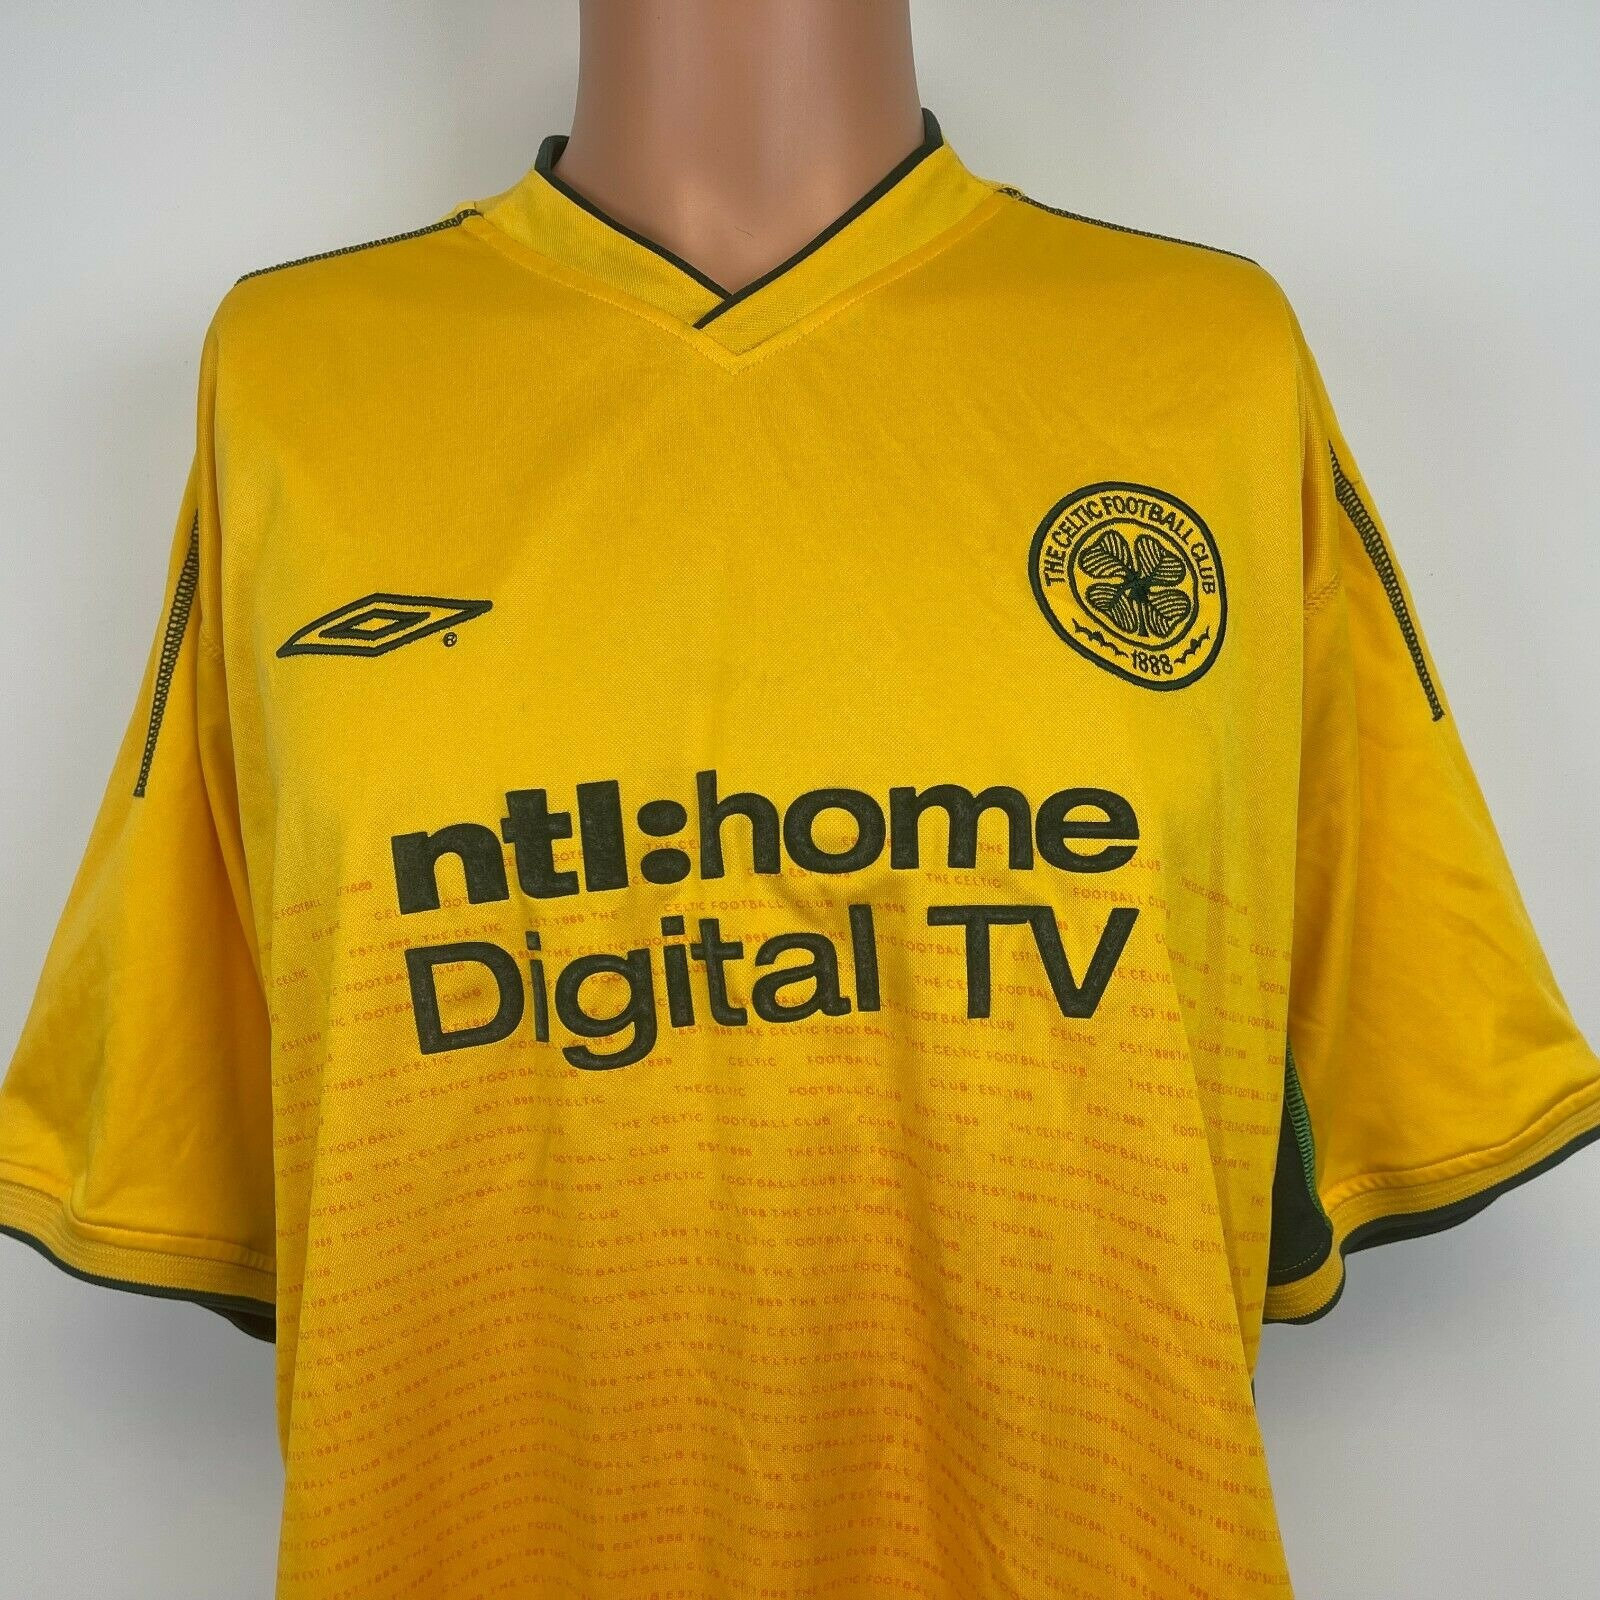 Celtic FC Yellow Striped Nike Soccer Jersey - 5 Star Vintage